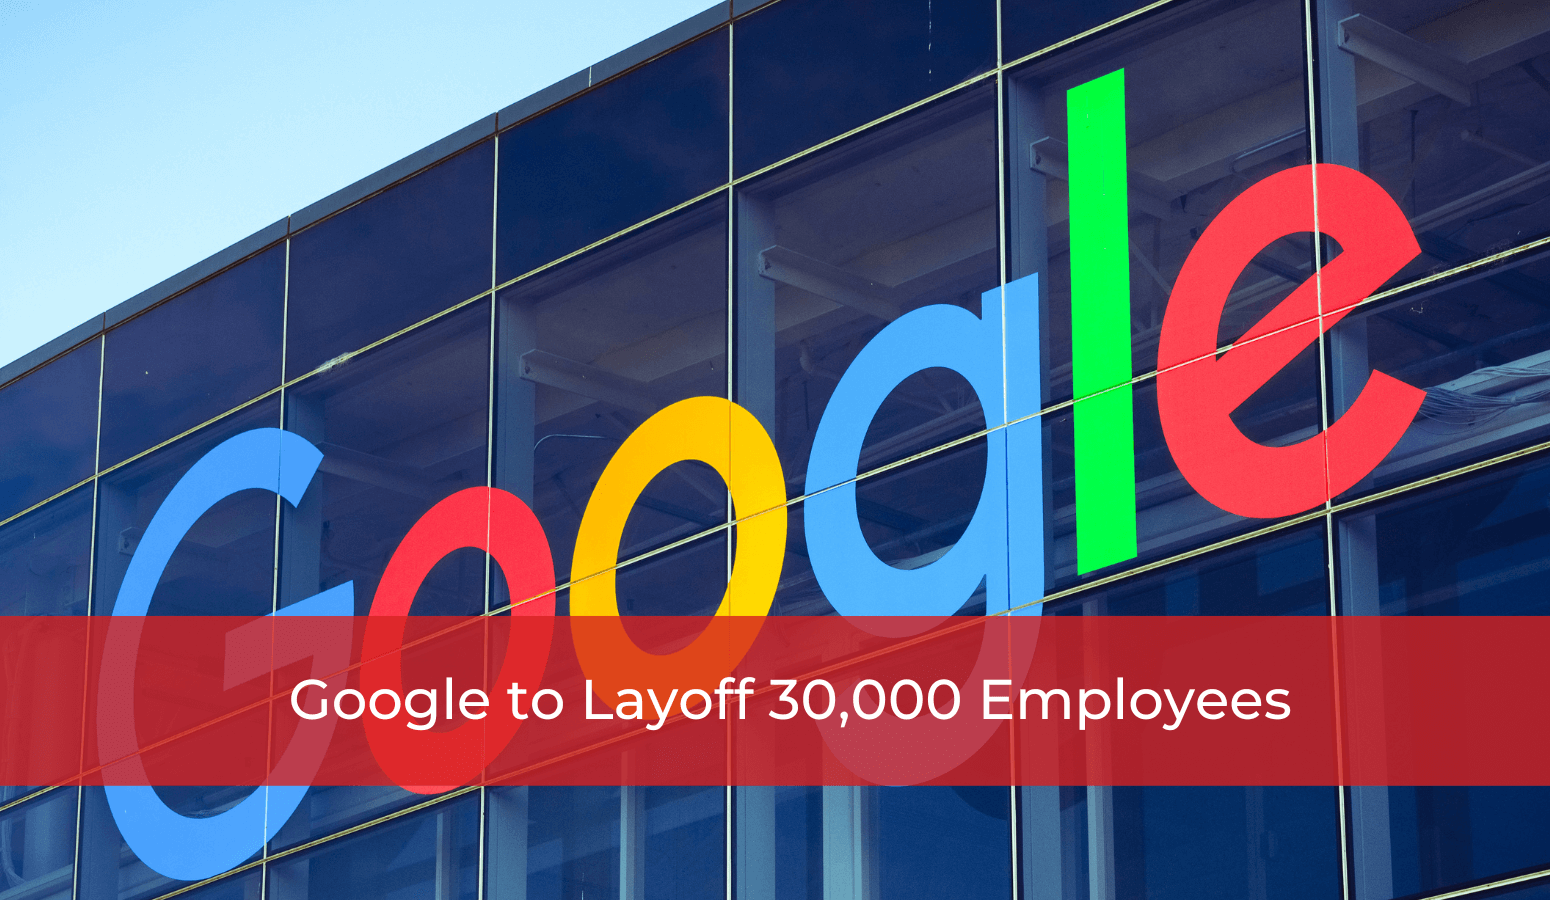 Featured image for “Google to Layoff 30,000 Employees”